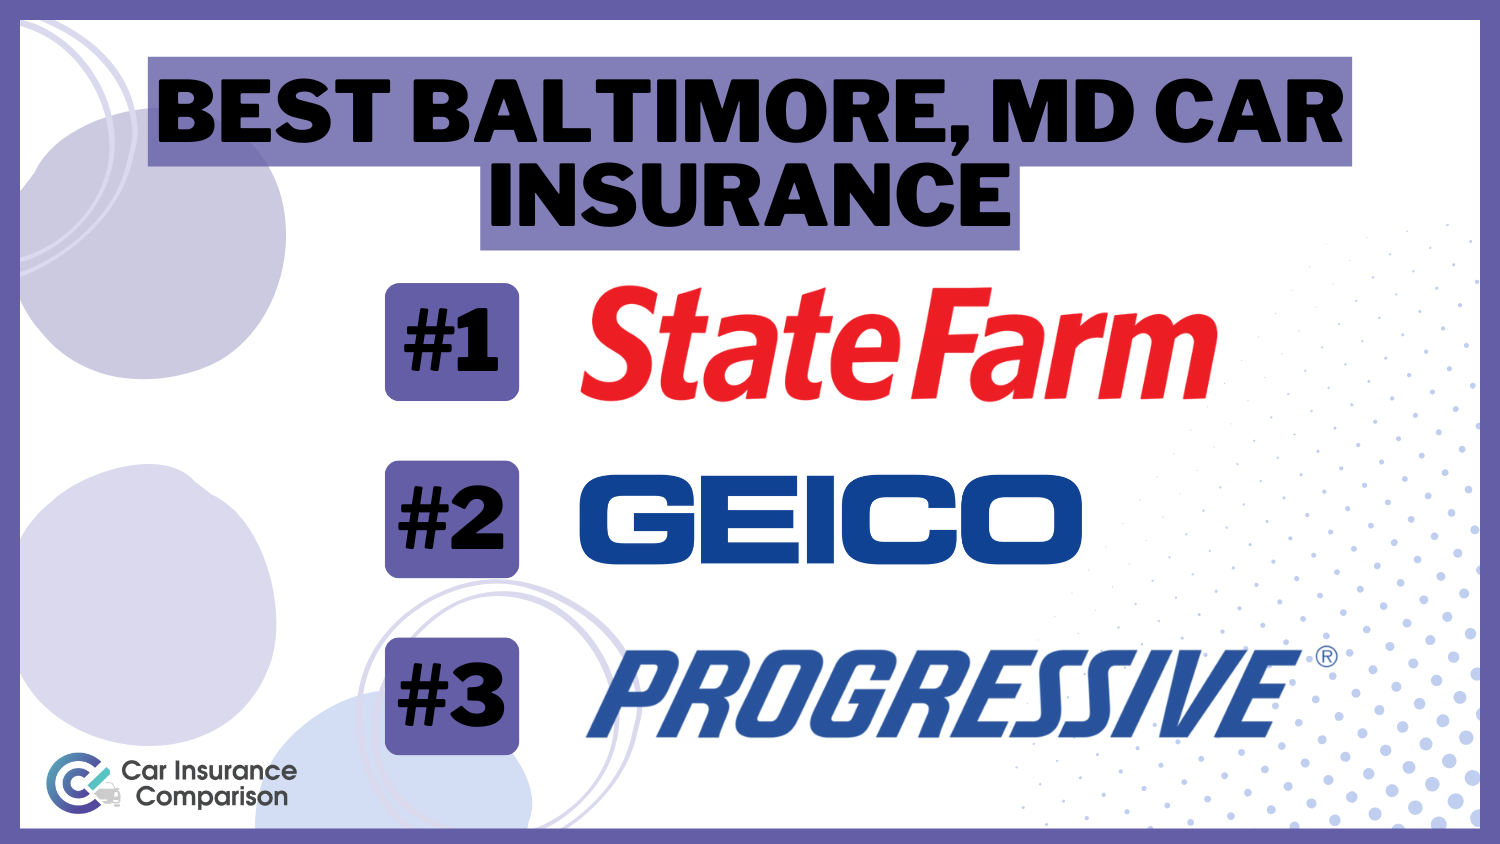 Best Baltimore, MD Car Insurance: State Farm, Geico, and Progressive